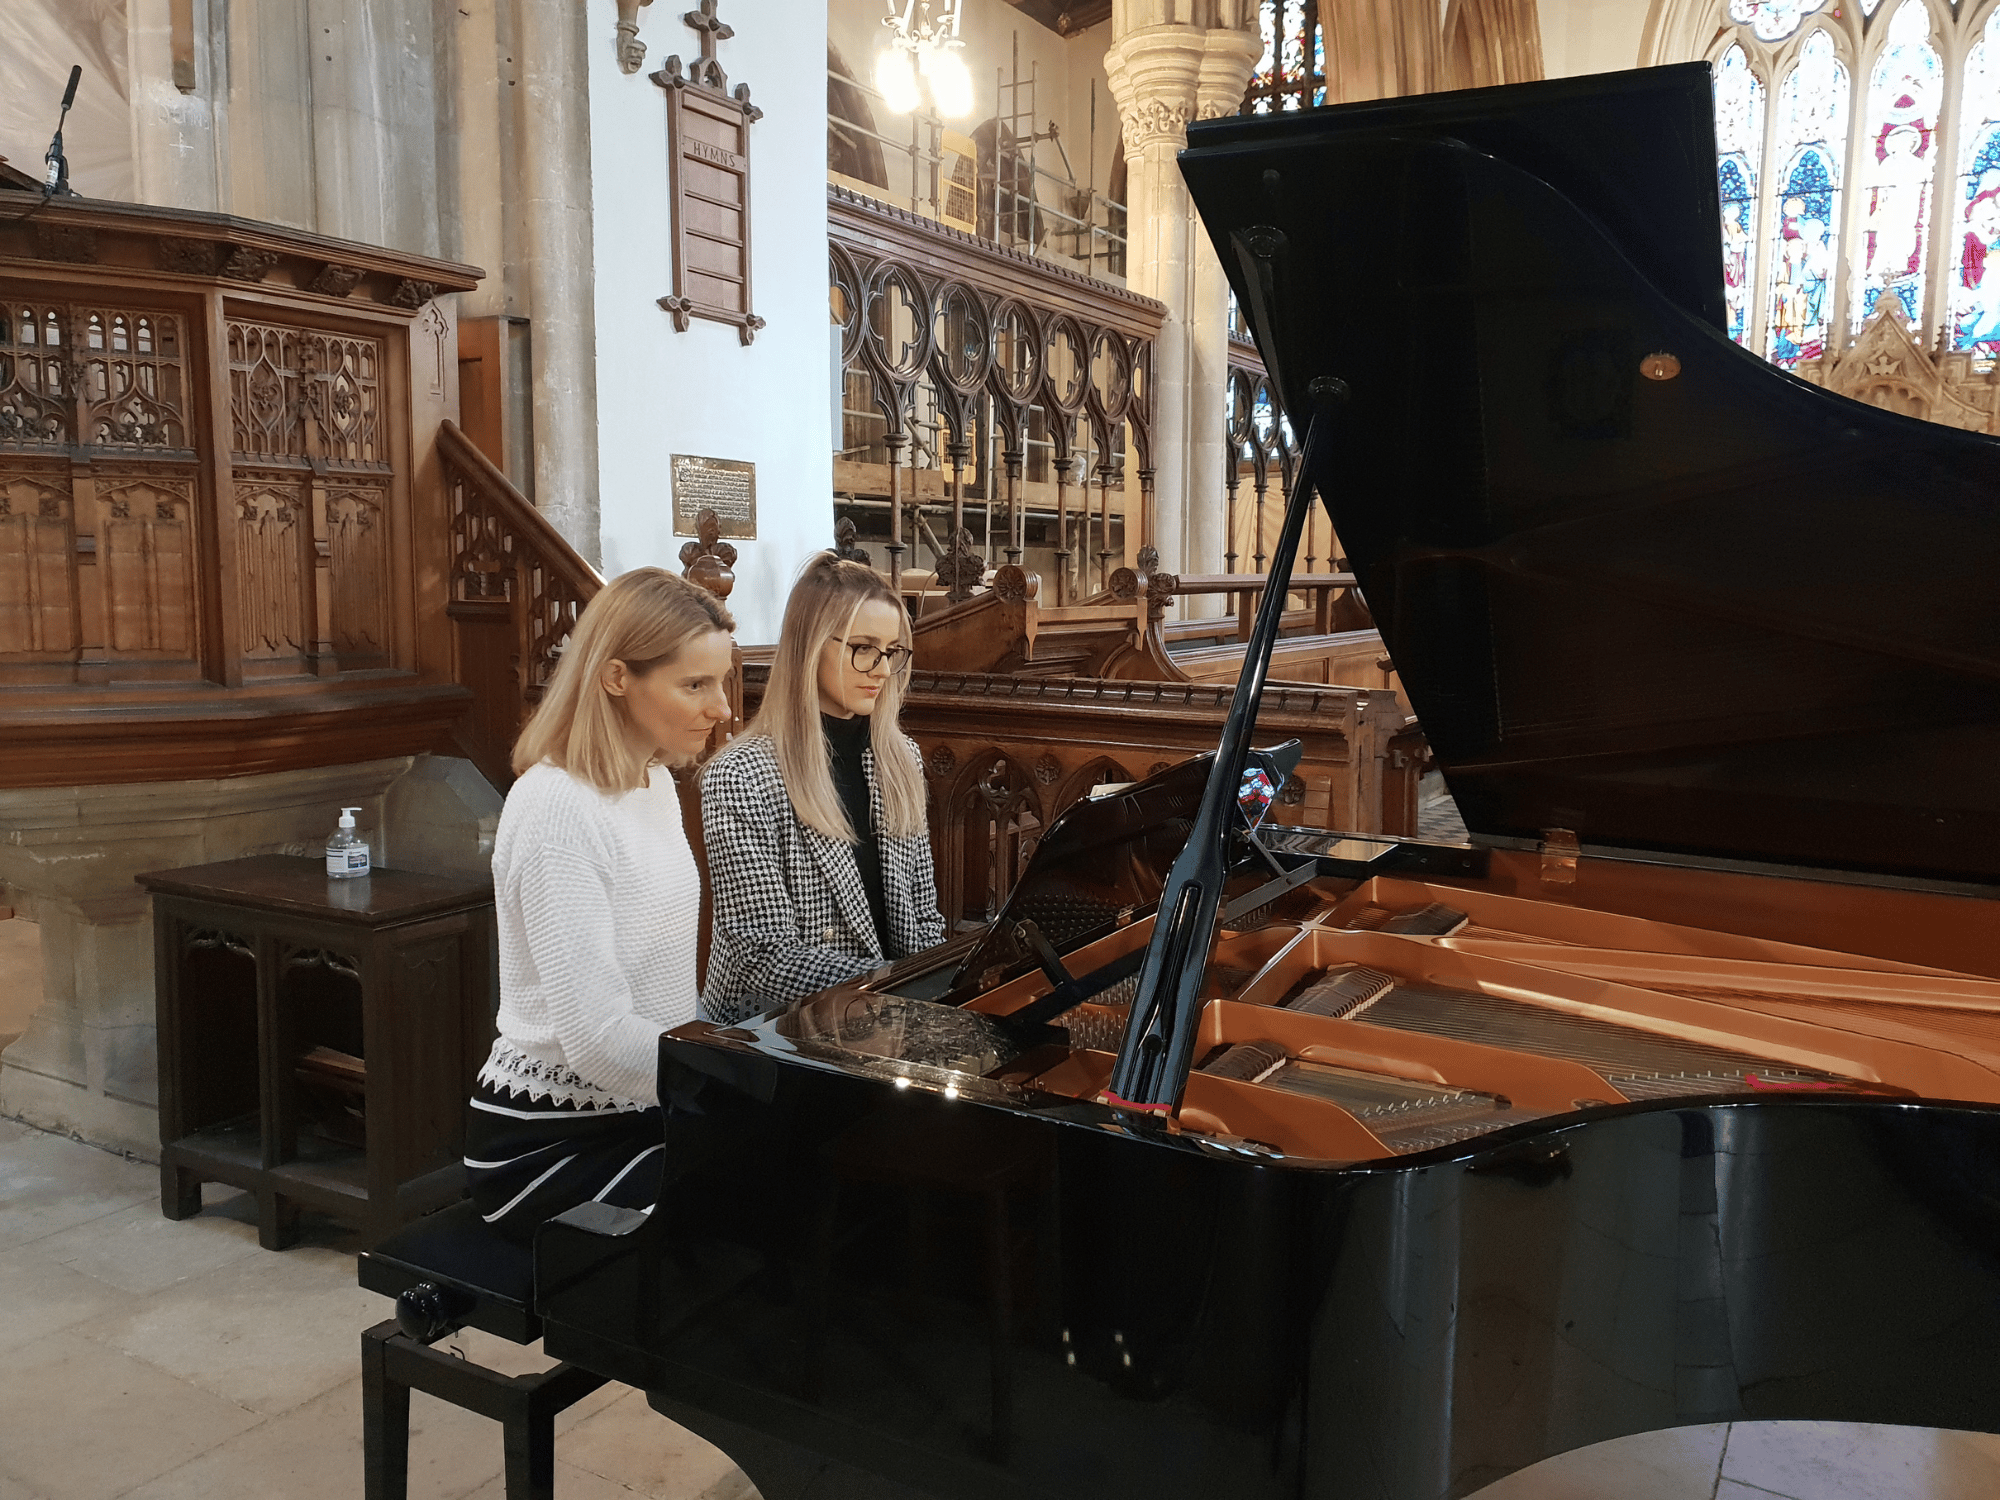 Student and teacher play piano duet in concert in a church